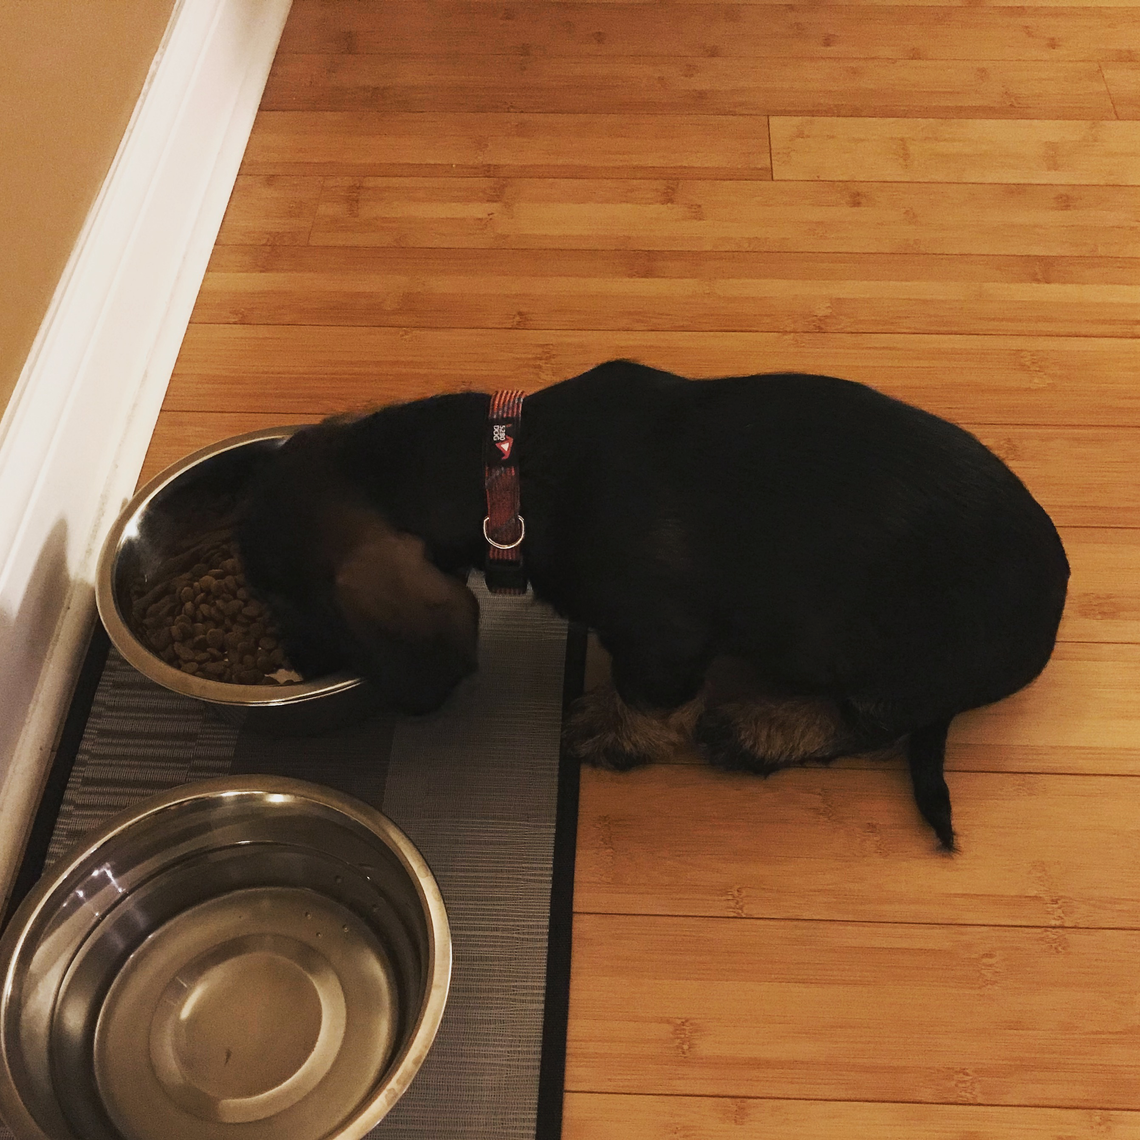 Dorian as a puppy eating dog food from a dog bowl that is probably too large for him